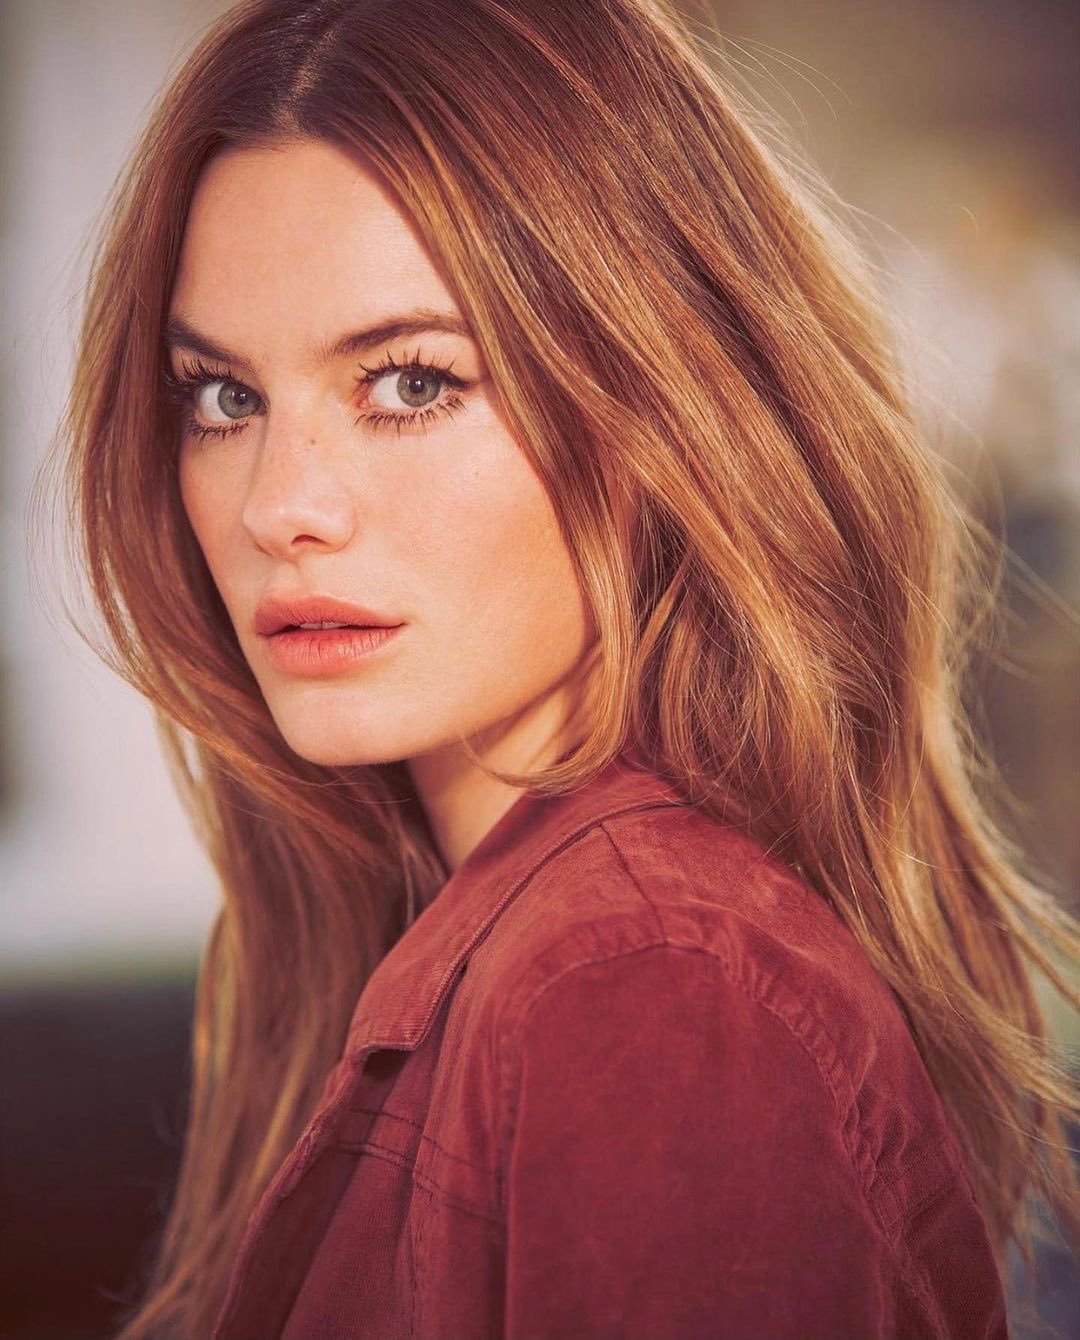 Presenting Camille Rowe X RVCA. Camille has launched her collaboration with RVCA ,a brand founded by her long 